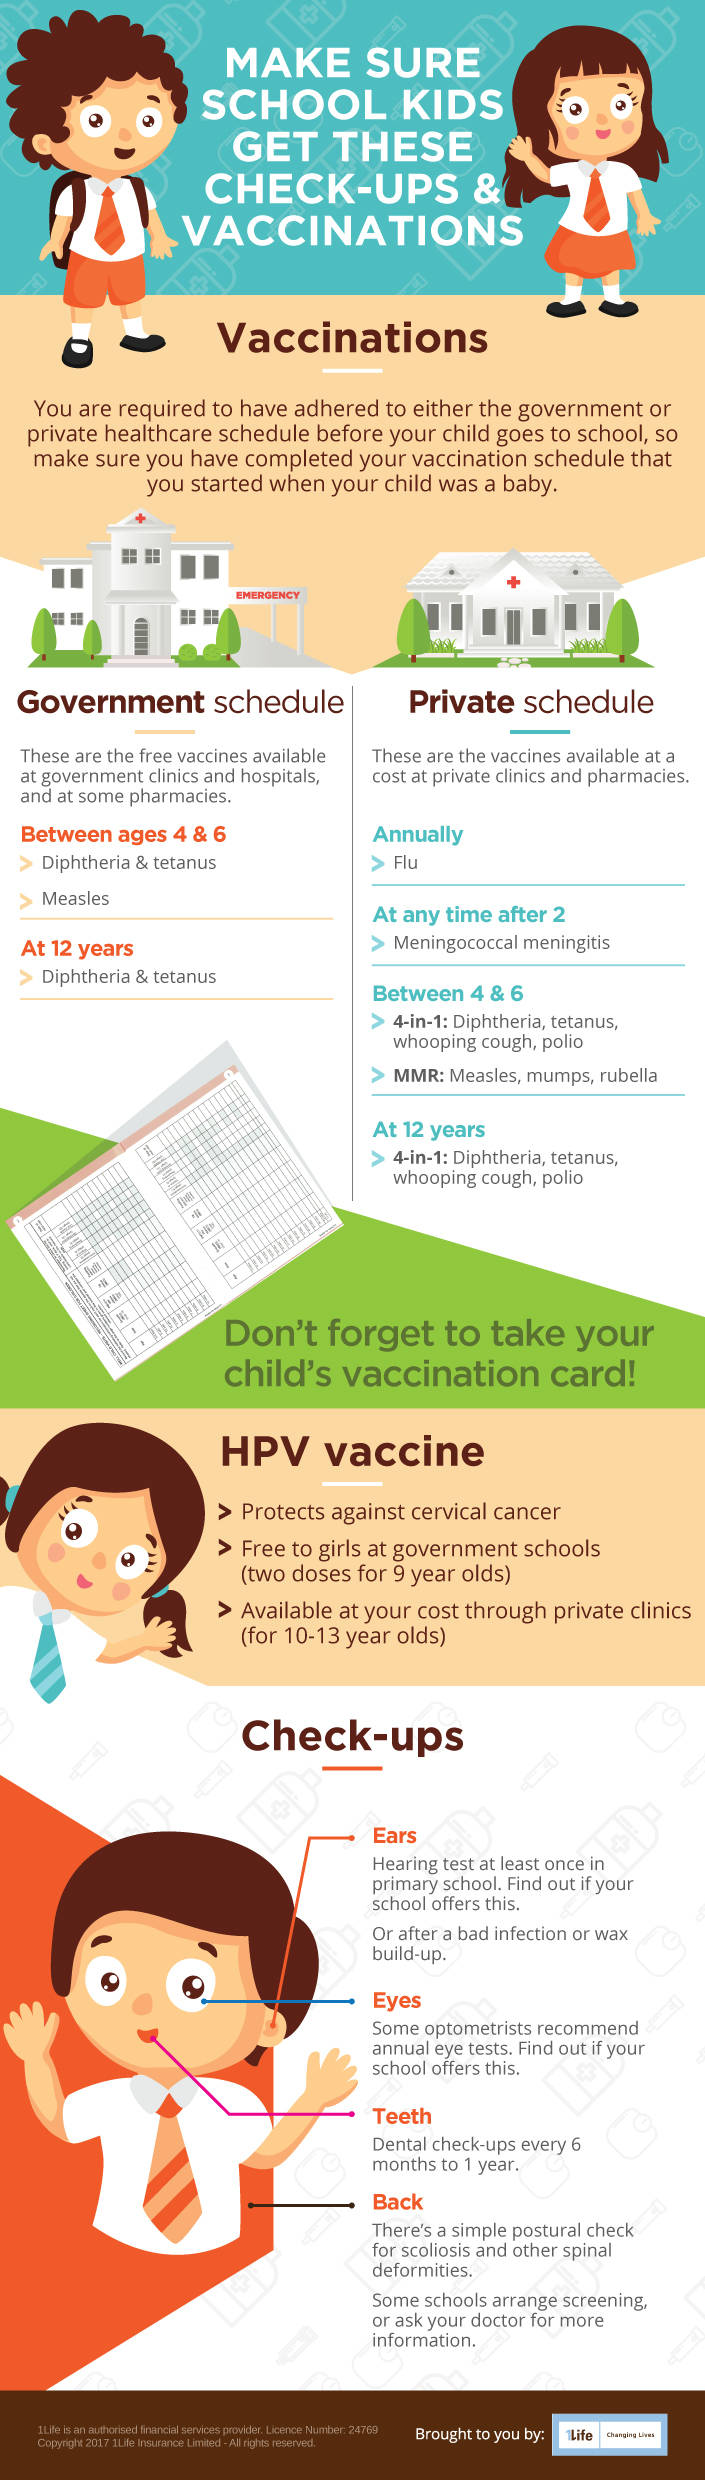 make sure school kids get these check-ups & vaccinations